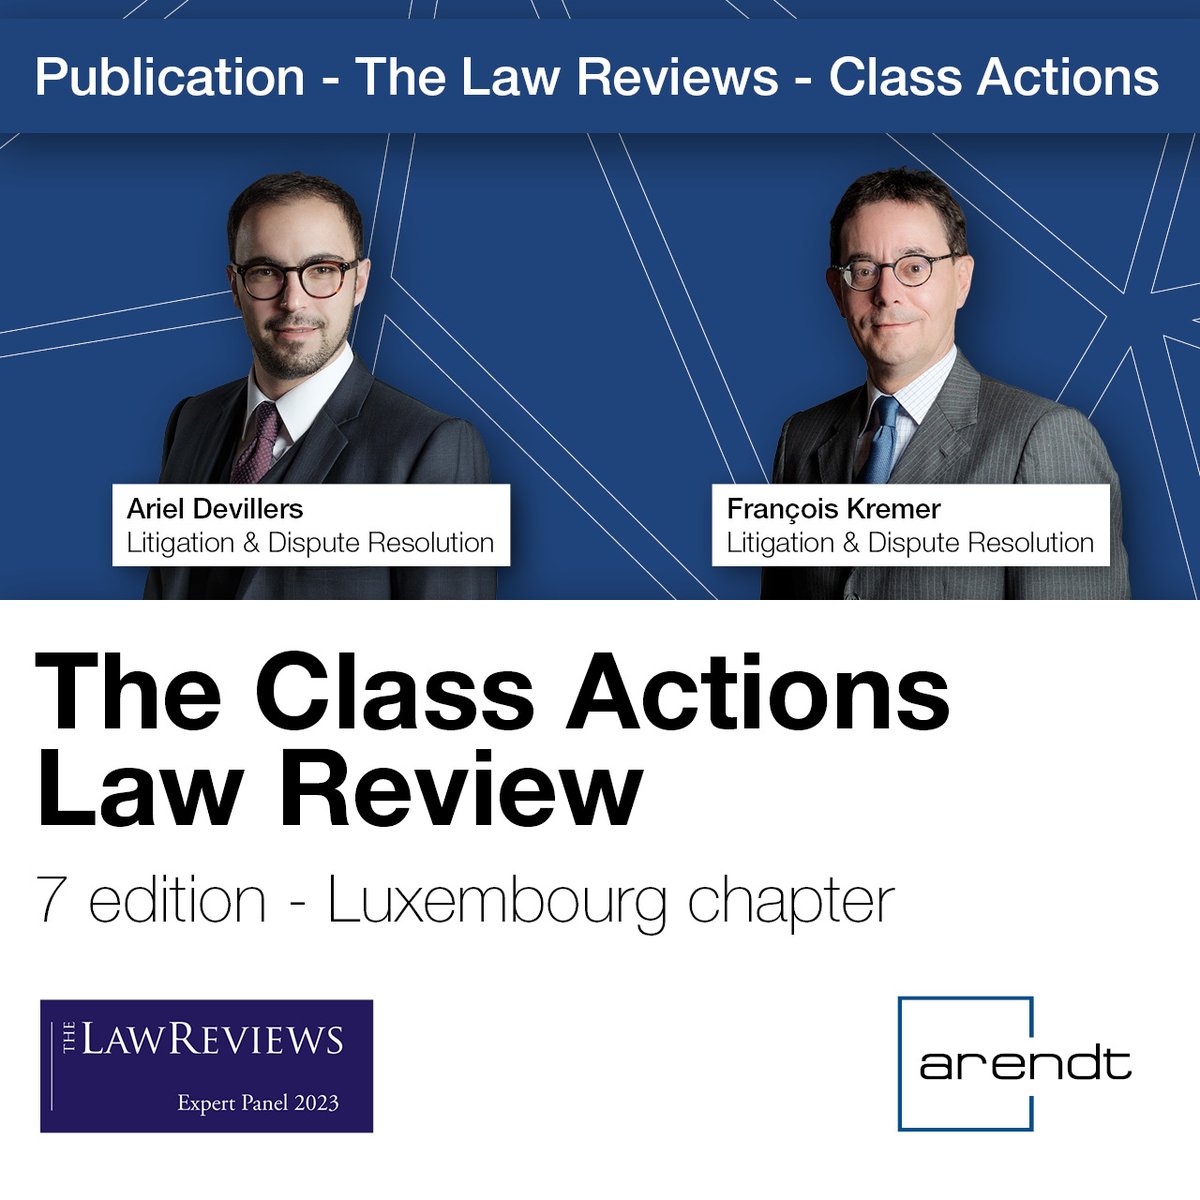 📖The 7th edition of The #ClassActions #Law Review is out. It provides practitioners and clients with a guide to class and collective actions regimes worldwide, with a particular focus on key procedures and recent developments.
👨👨Our experts are the authors of the #Luxembourg…